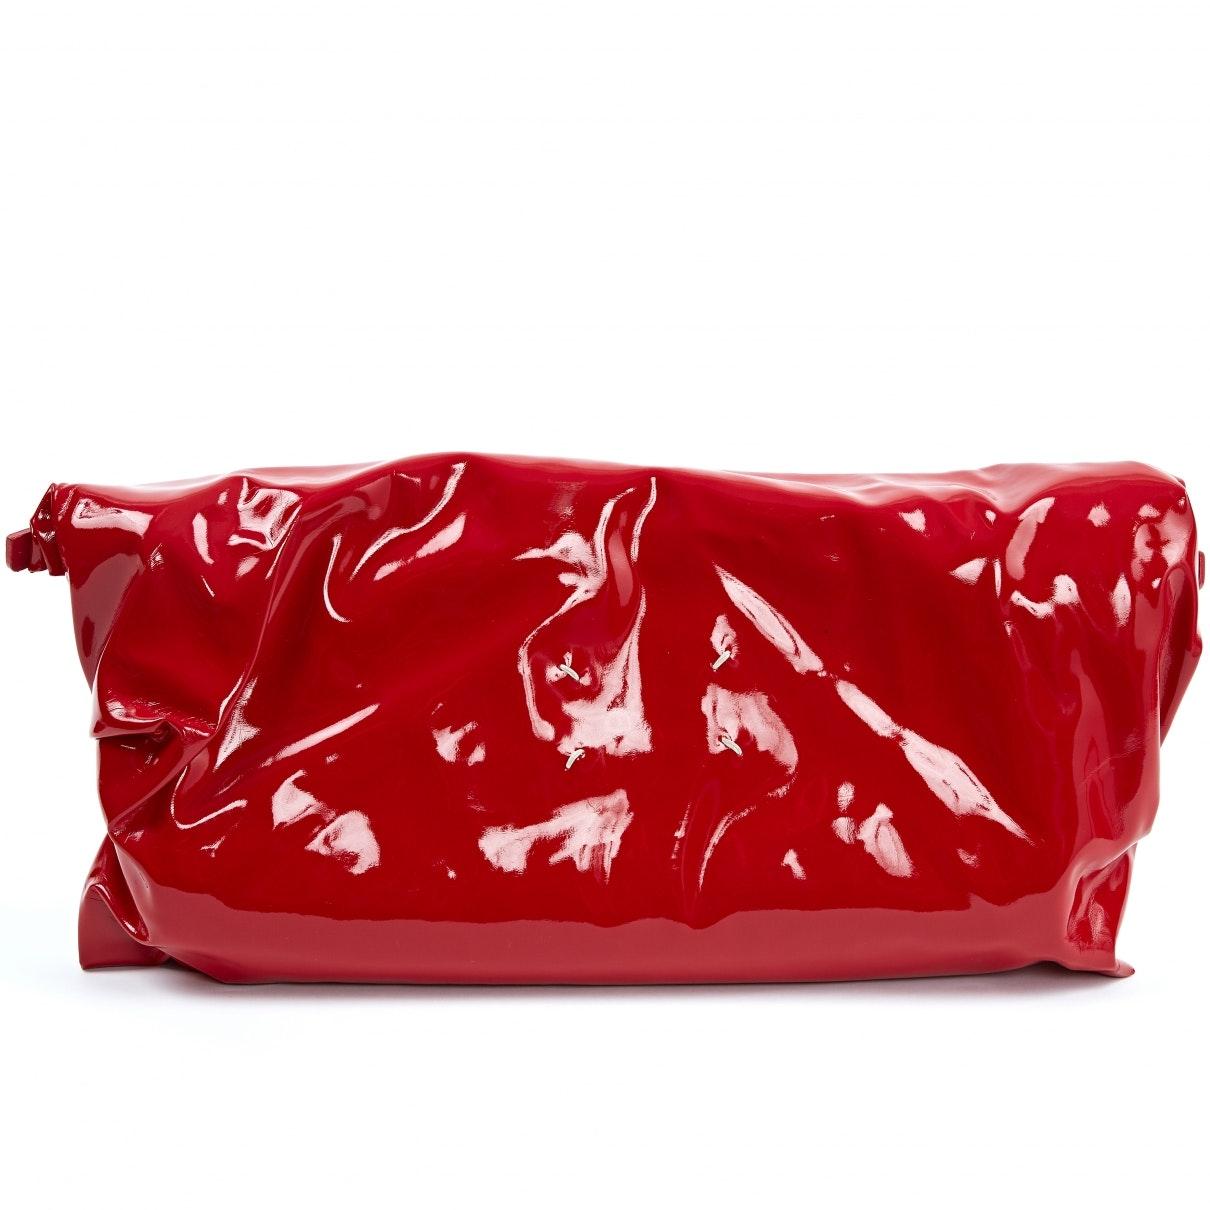 Maison Margiela Red Patent Leather Clutch Bag - Lyst